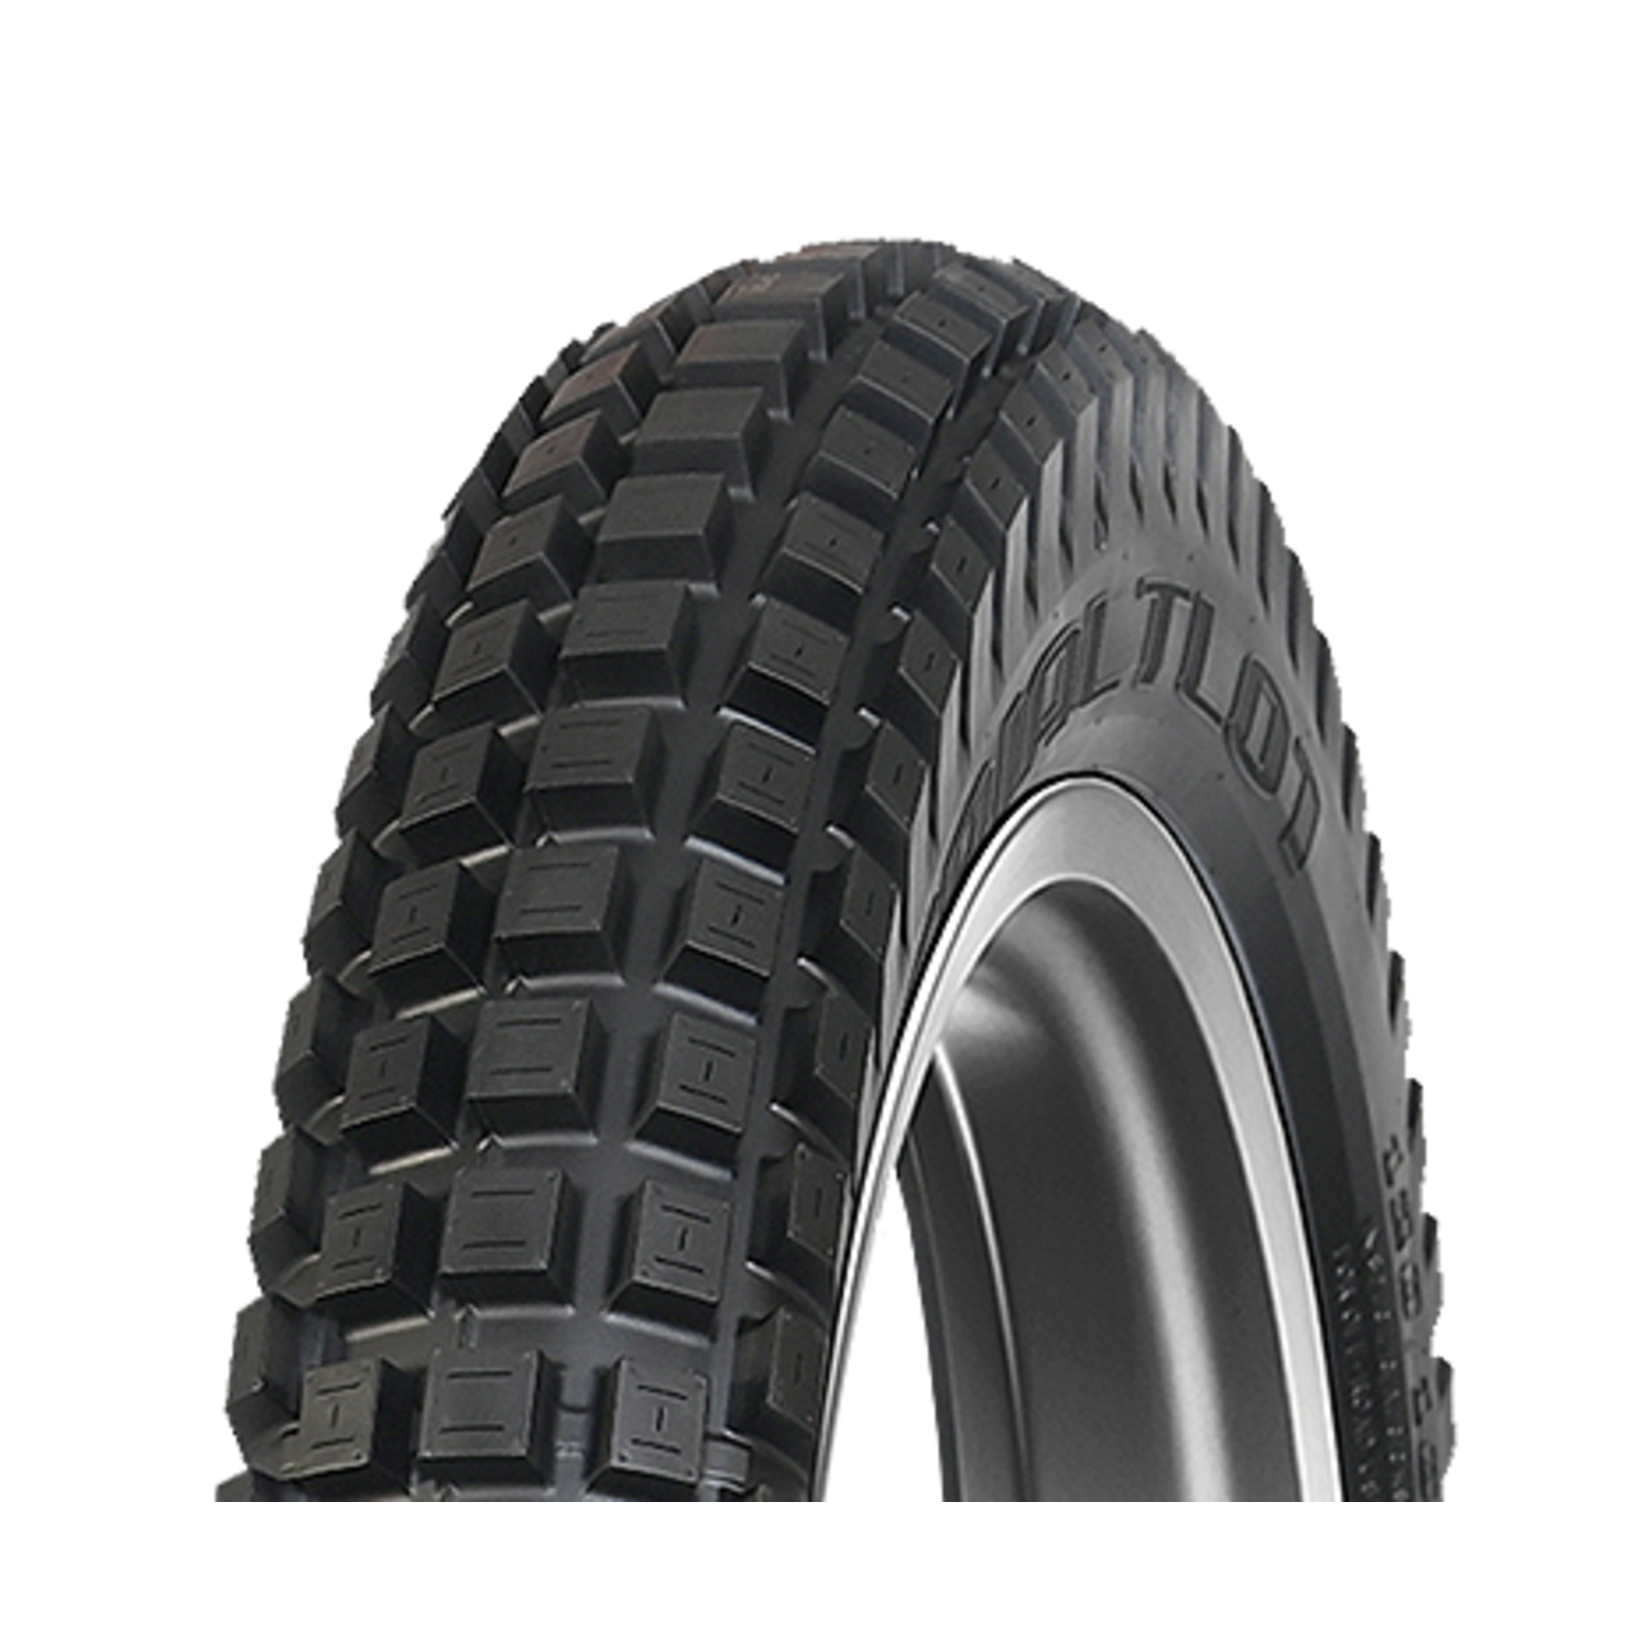 DUNLOP DUNLOP GEOMAX TRIAL FRONT TIRE TL01 80/100-21